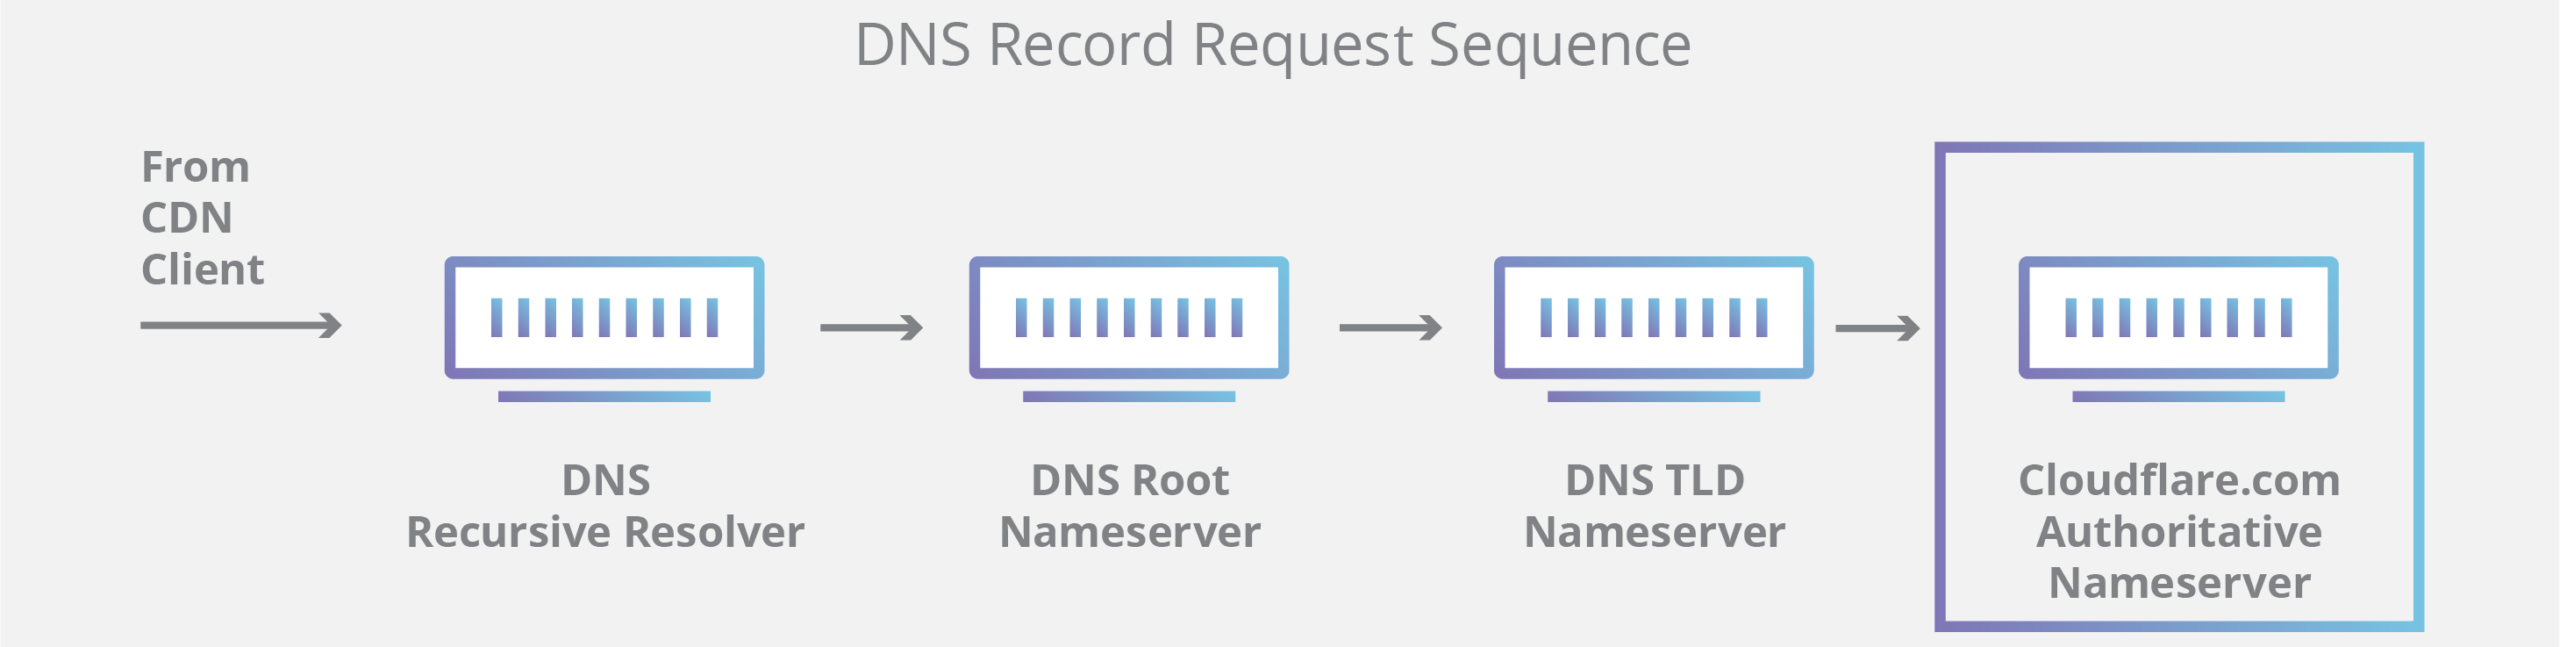 dns-record-request-sequence1